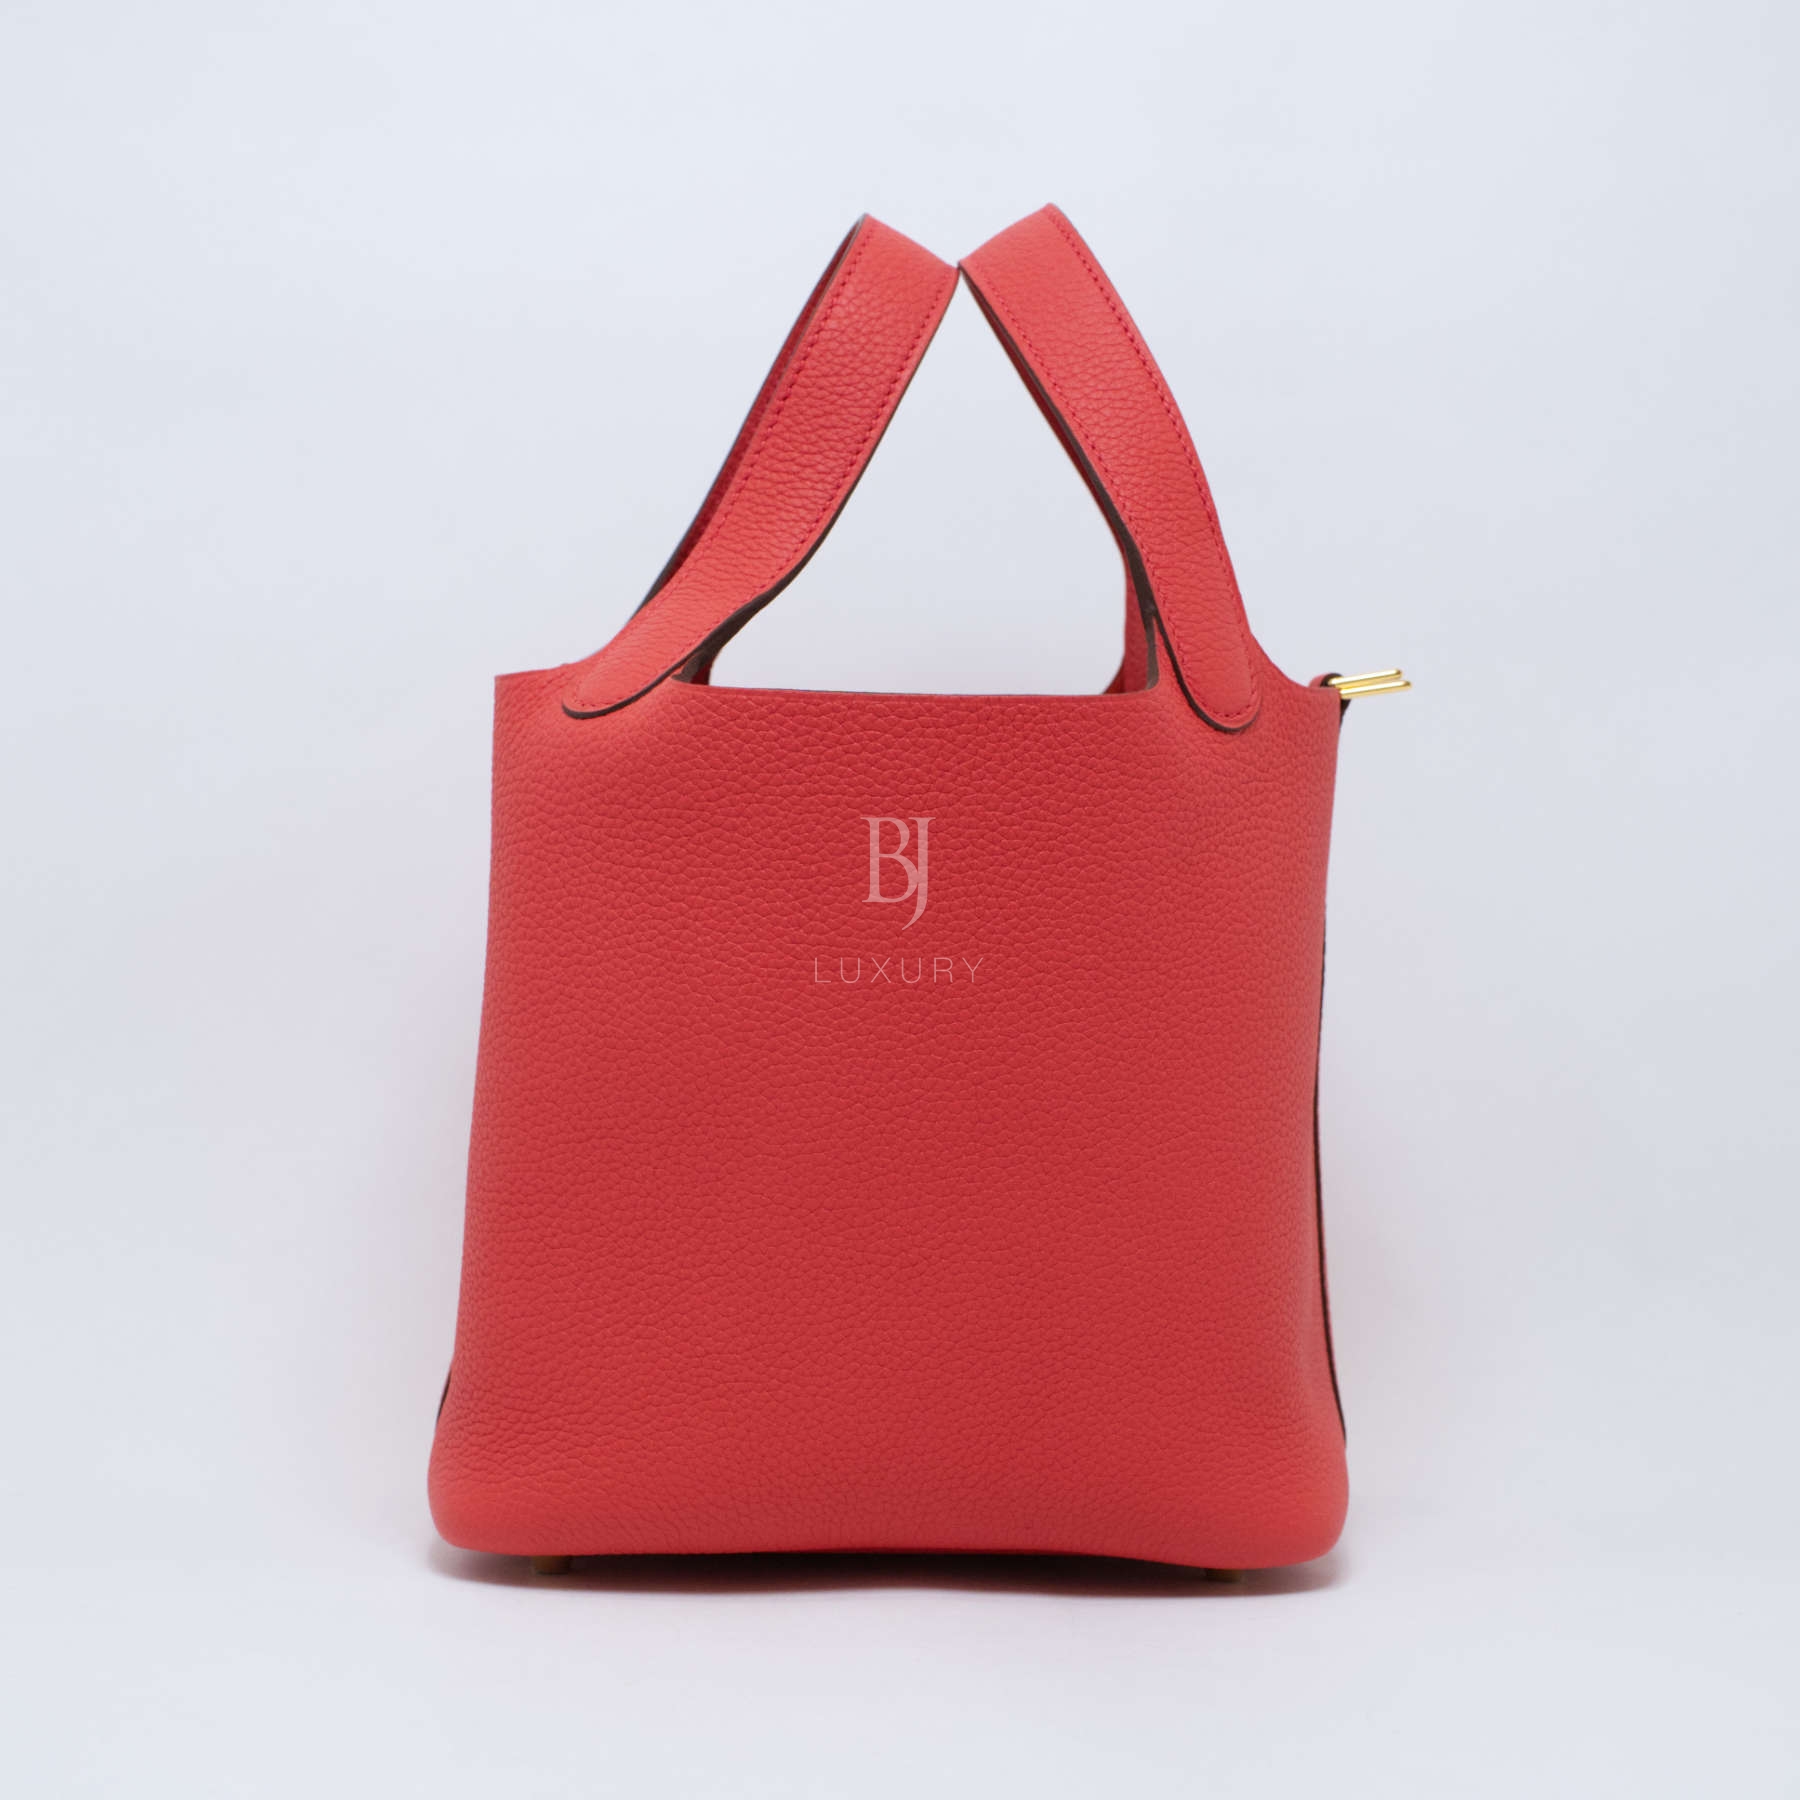 HERMES-PICOTIN-18-BOUGAINVILLEA-TAURILLONMAURICE-4805 side1.jpg